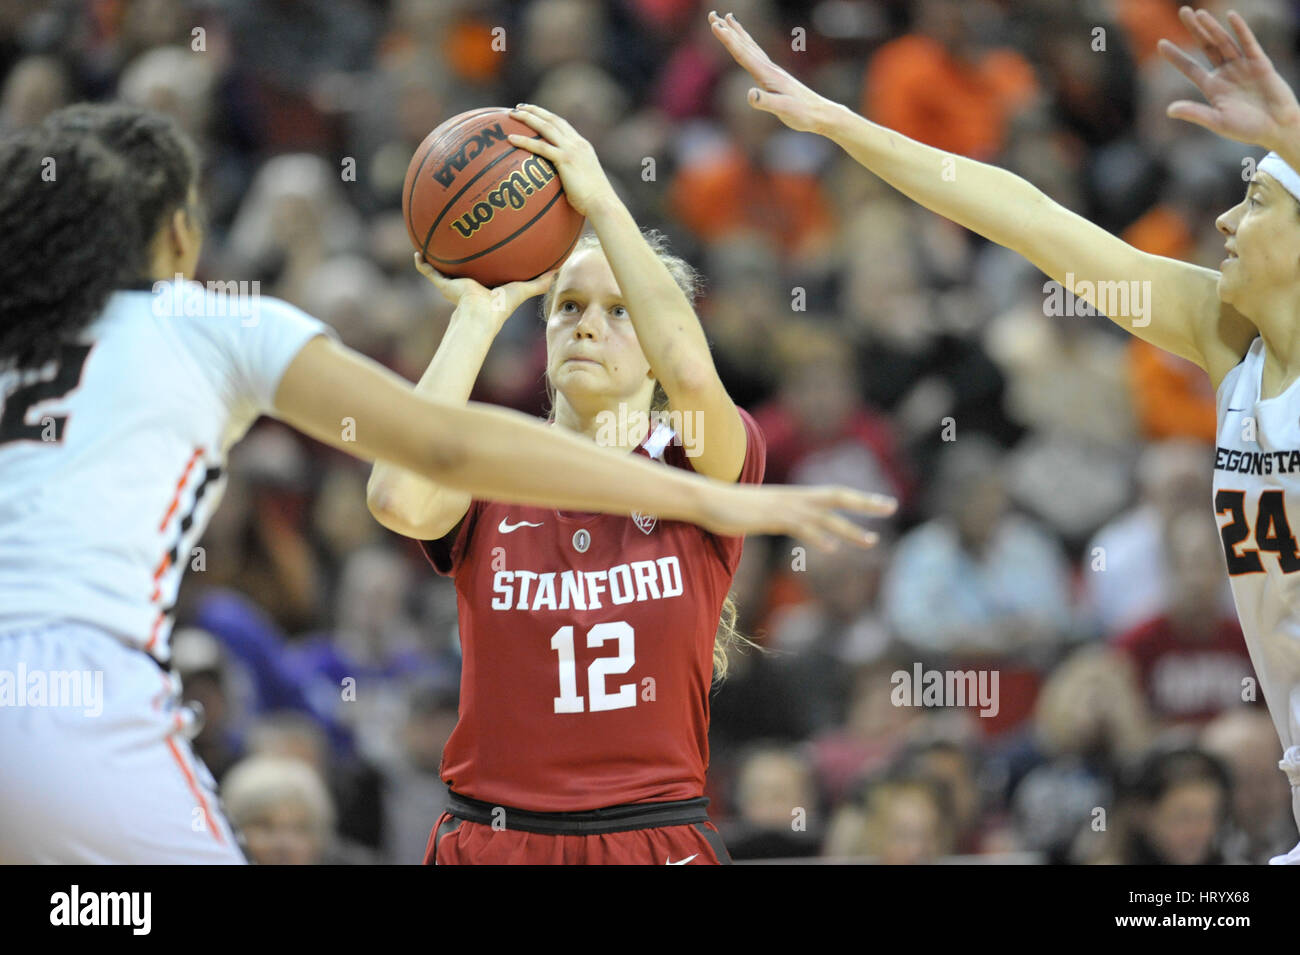 Seattle, WA, USA. 5th Mar, 2017. Stanford's Brittany McPhee (12) attempting a 3 point shot during the PAC12 women's tournament final between the Oregon State Beavers and the Stanford Cardinal. The game was played at Key Arena in Seattle, WA. Jeff Halstead/CSM/Alamy Live News Stock Photo